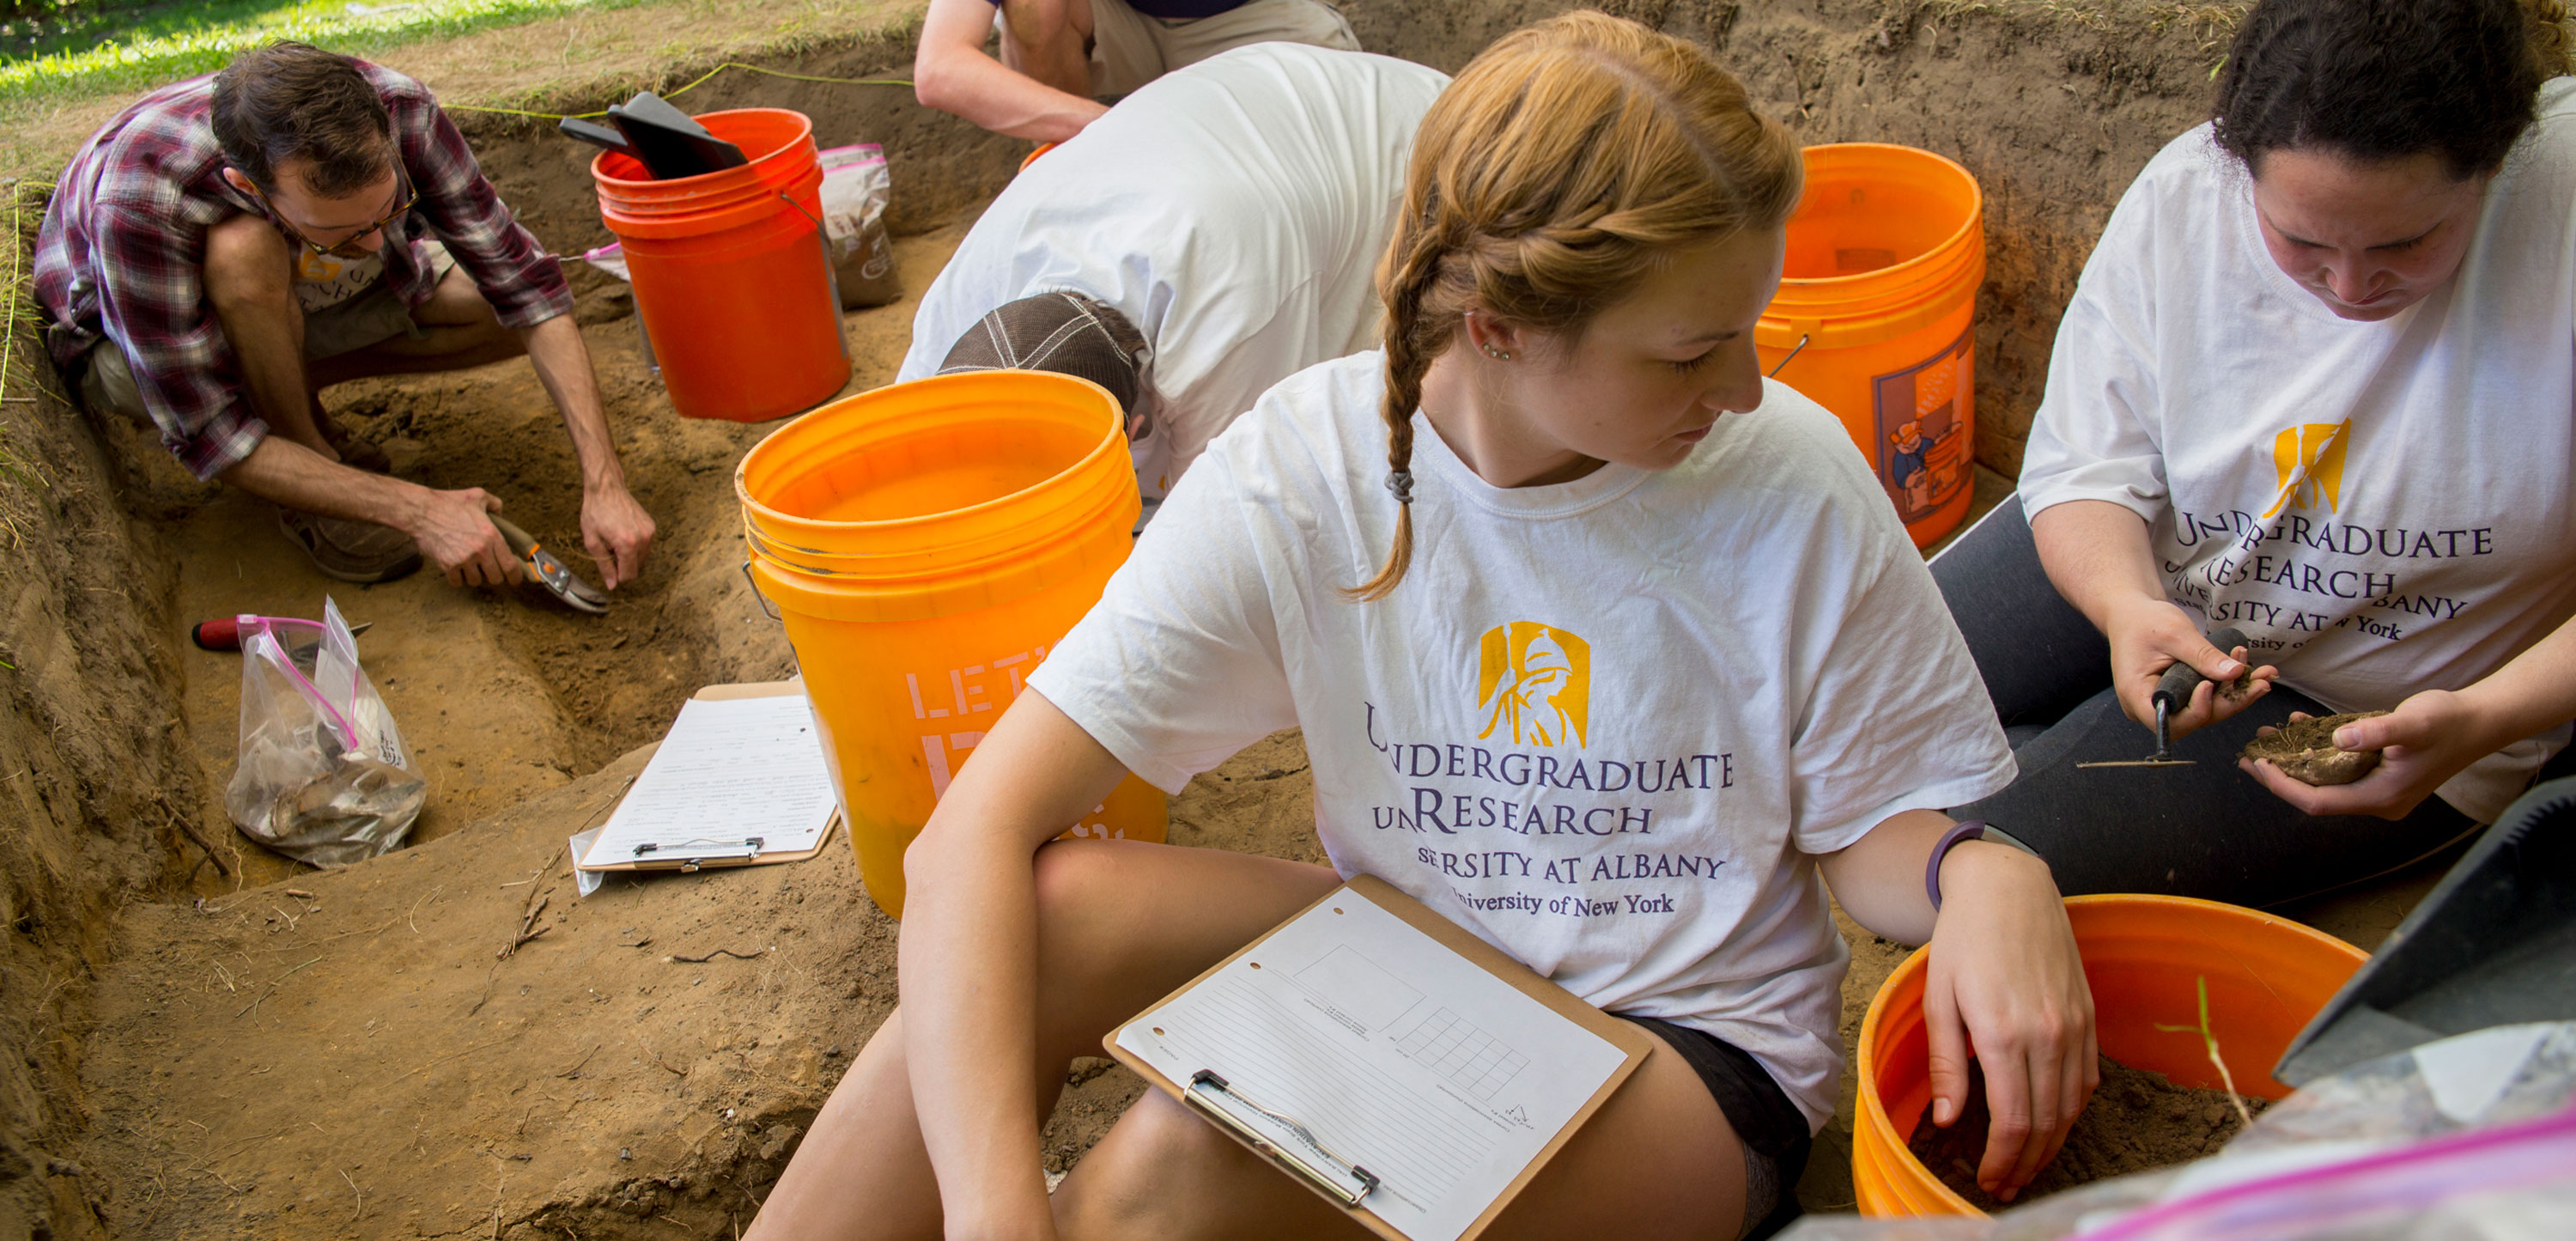 Students wearing Undergraduate Research, University at Albany, t-shirts sift through dirt at an outdoor archeological dig.